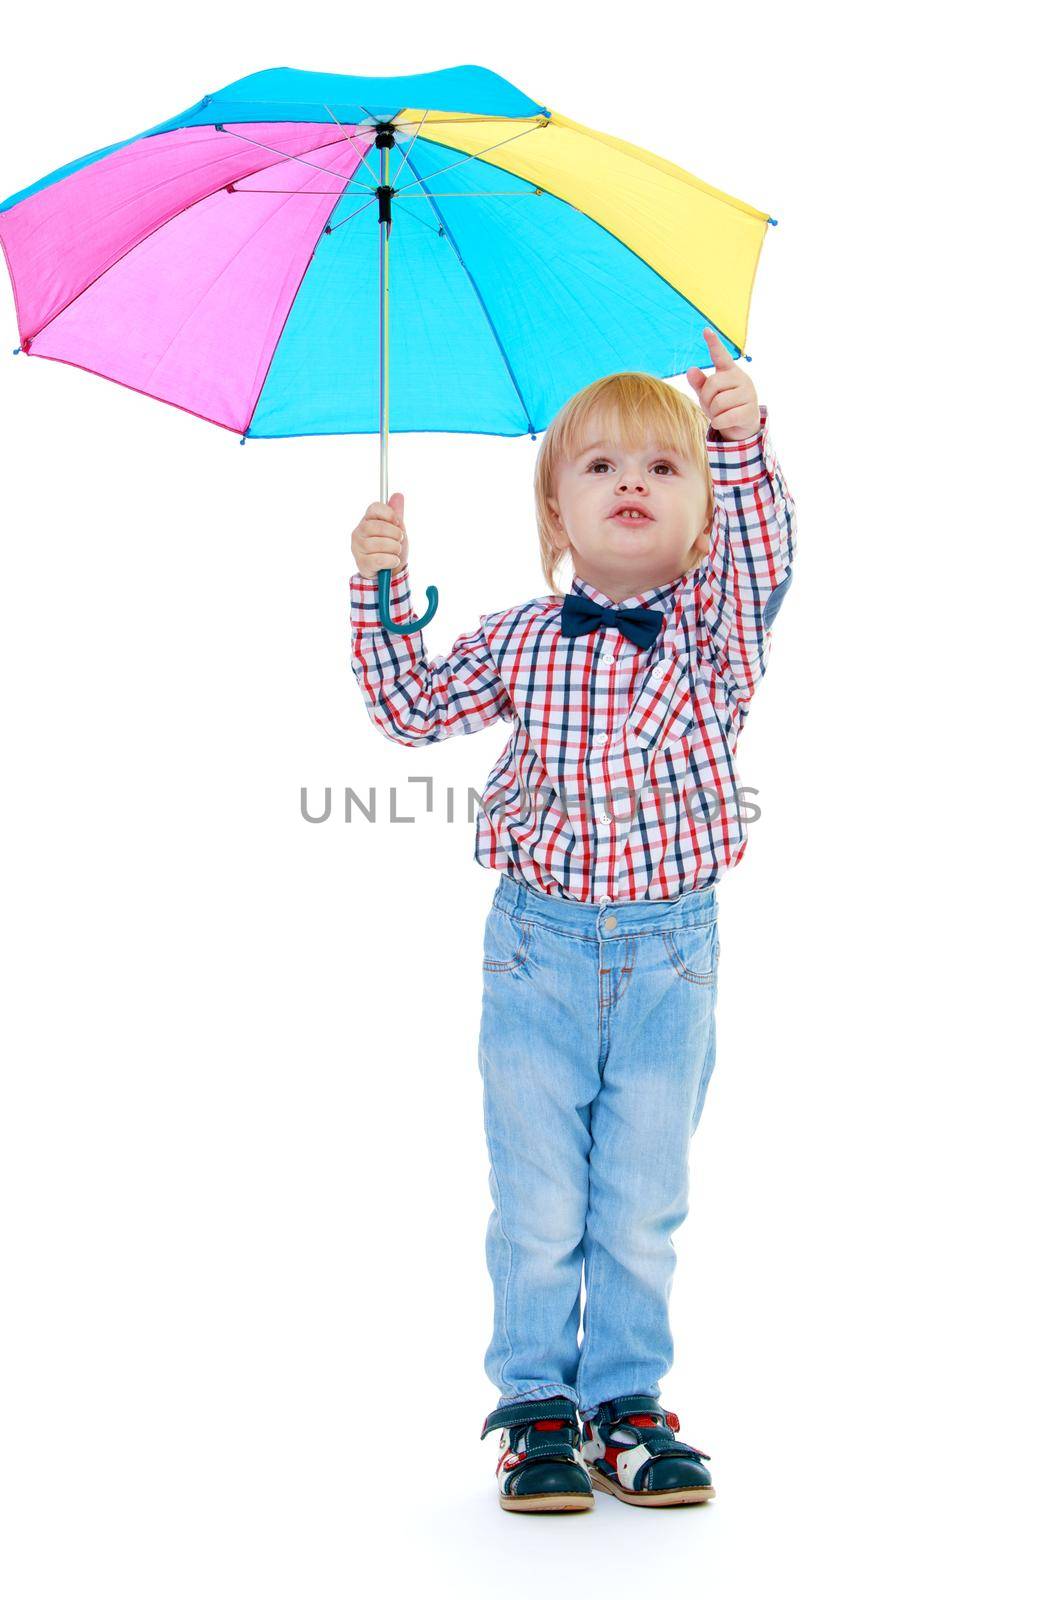 Little boy stands under a colorful umbrella.Childhood education development in the Montessori school concept. Isolated on white background.